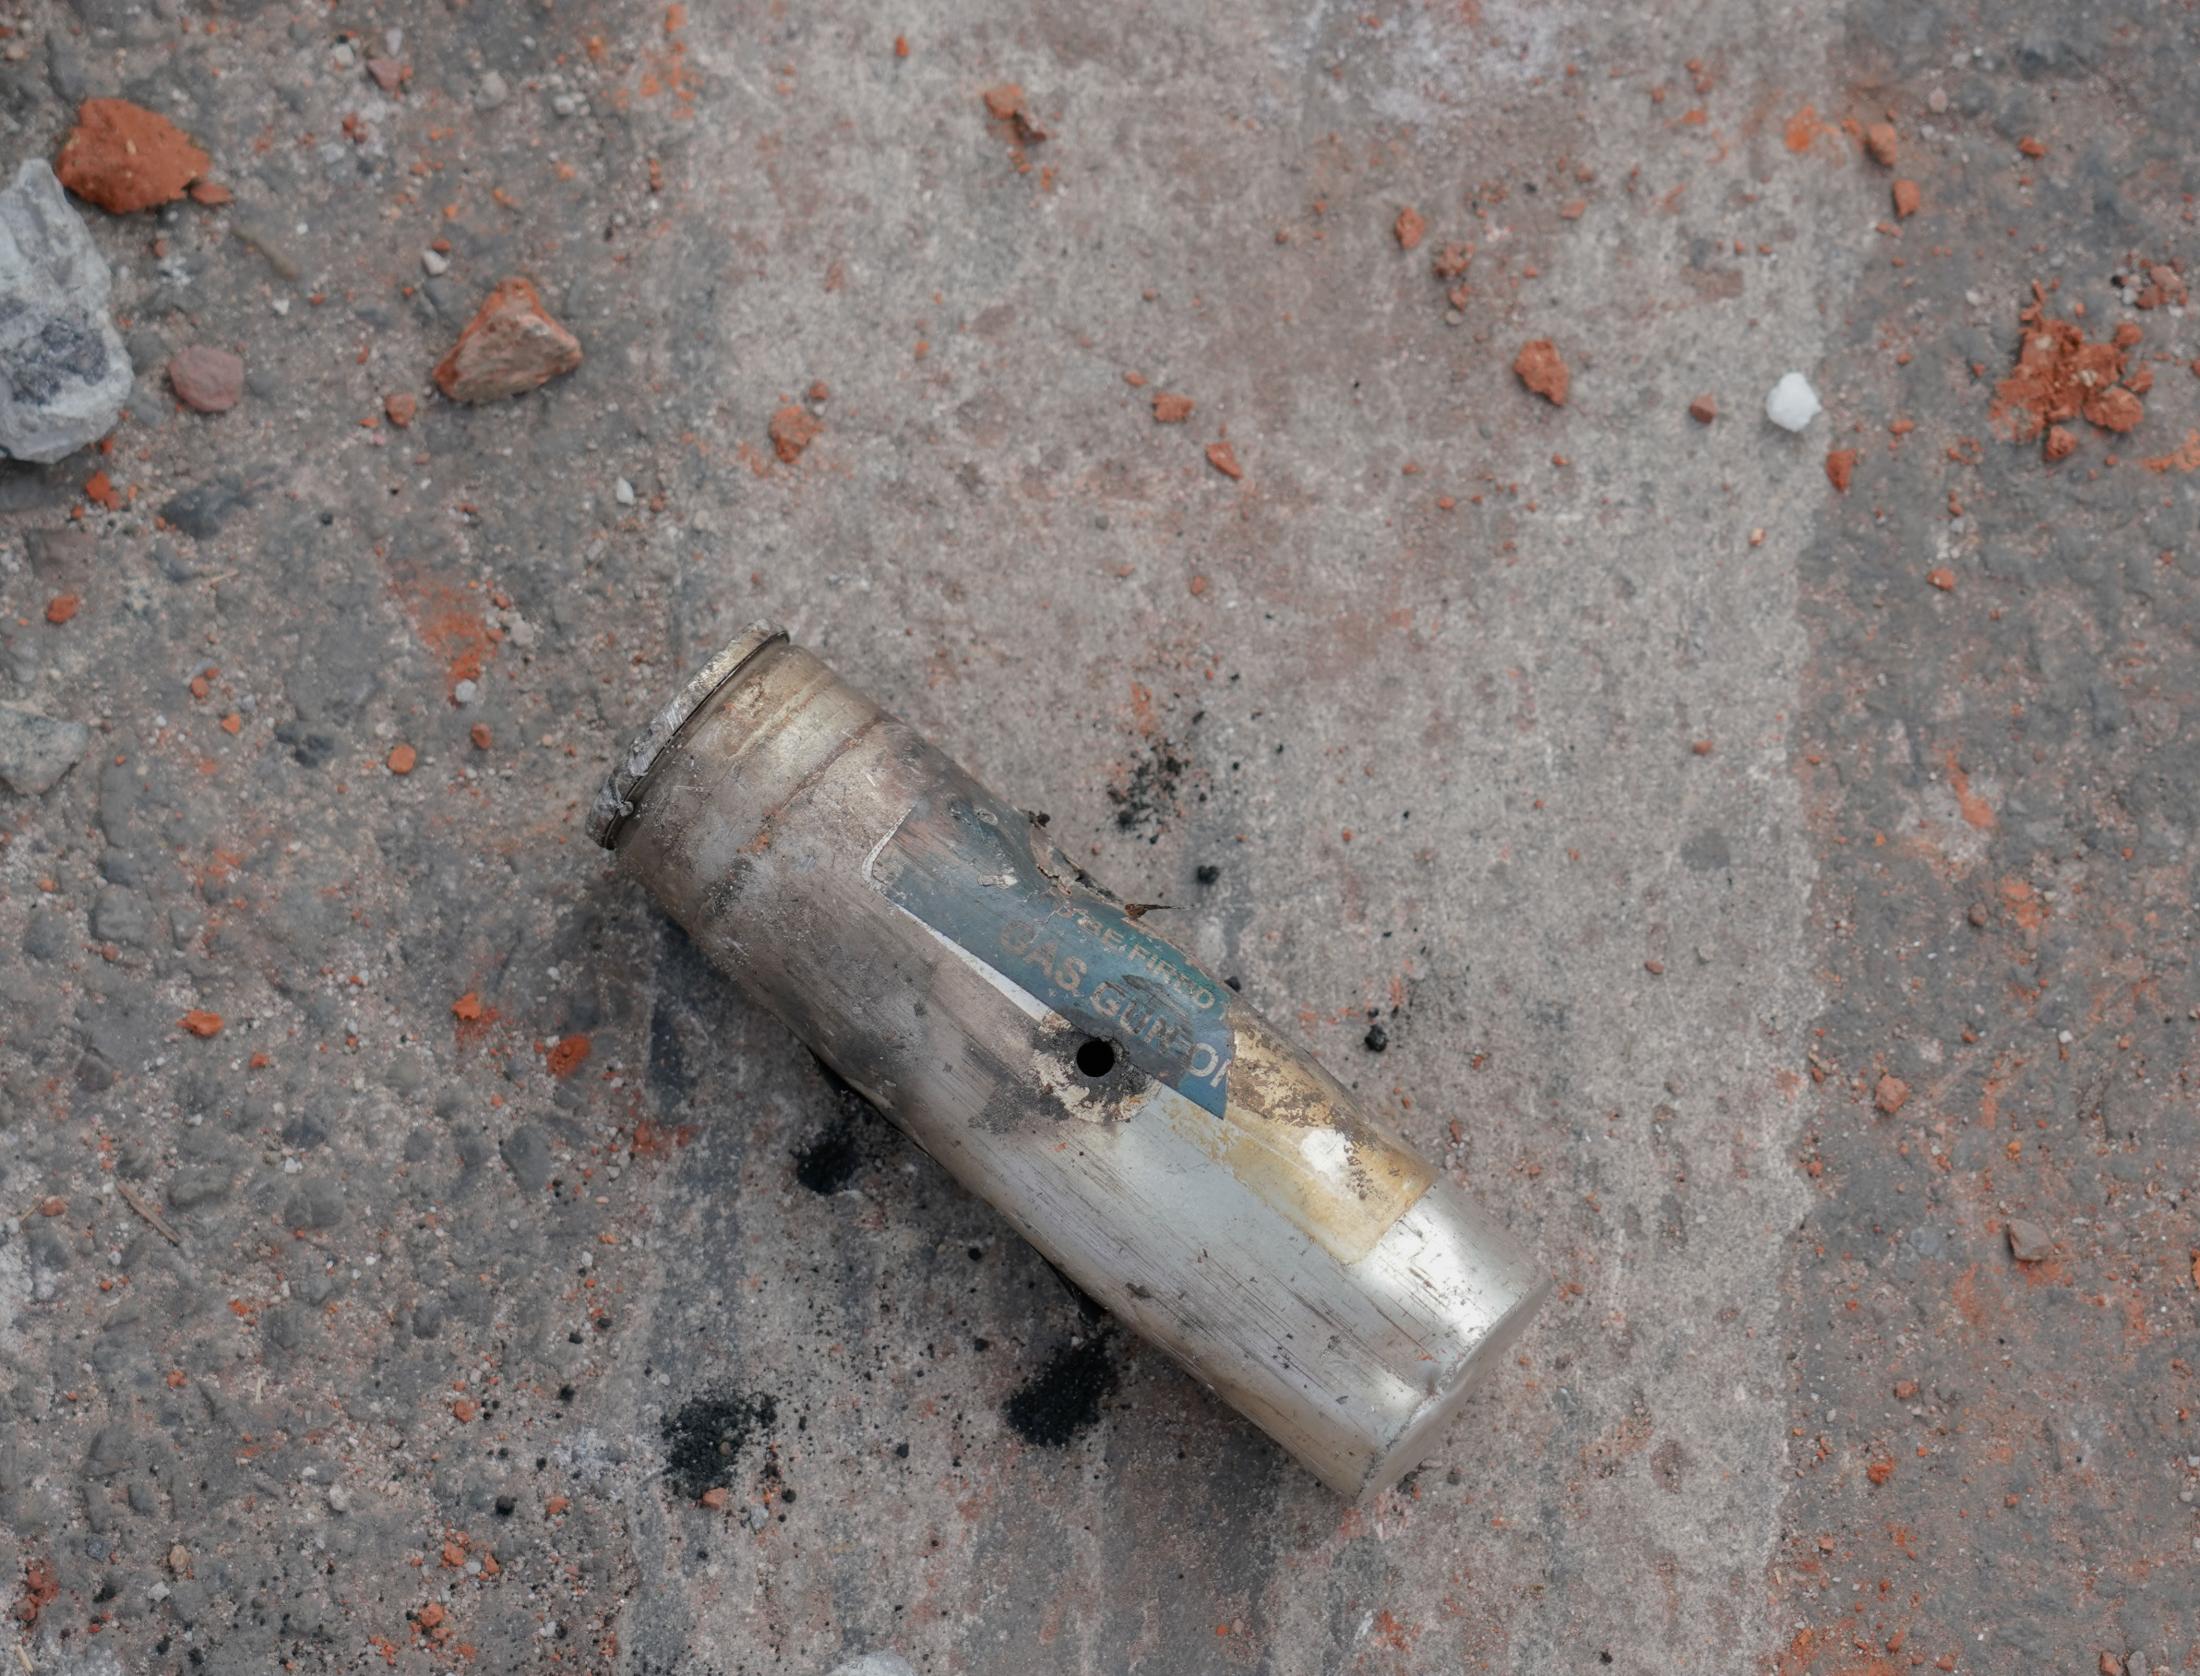 Aazadi - A exhausted tear gas canister sits among the rubble of...